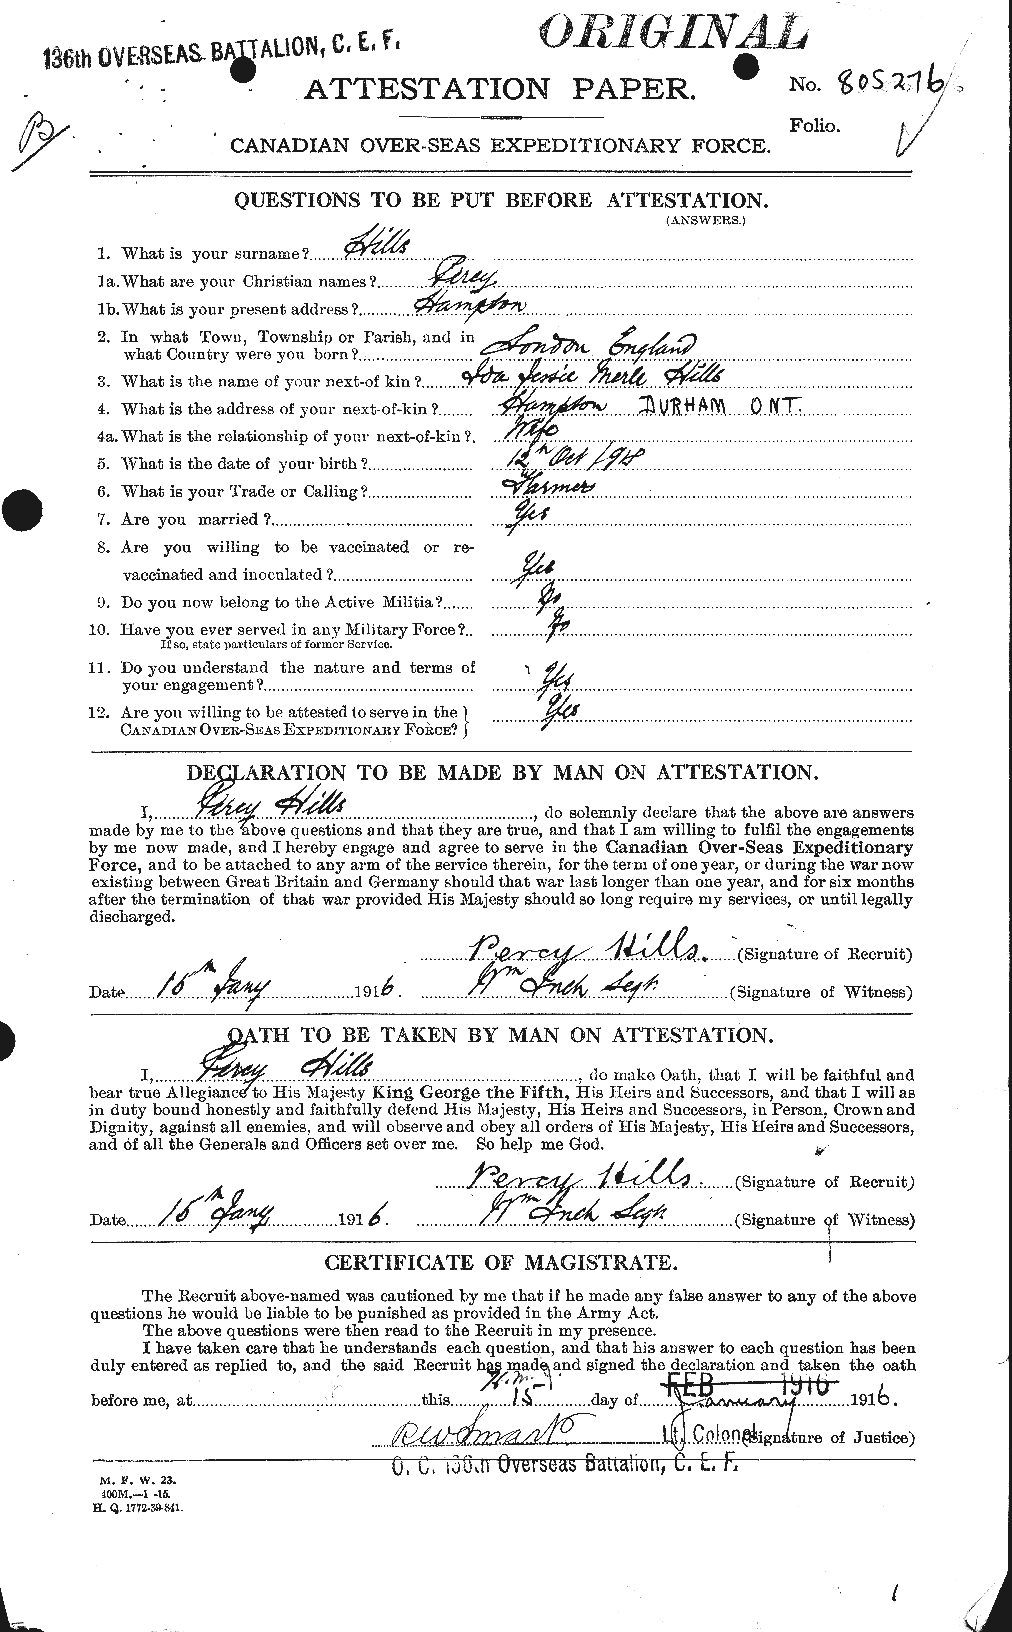 Personnel Records of the First World War - CEF 395068a